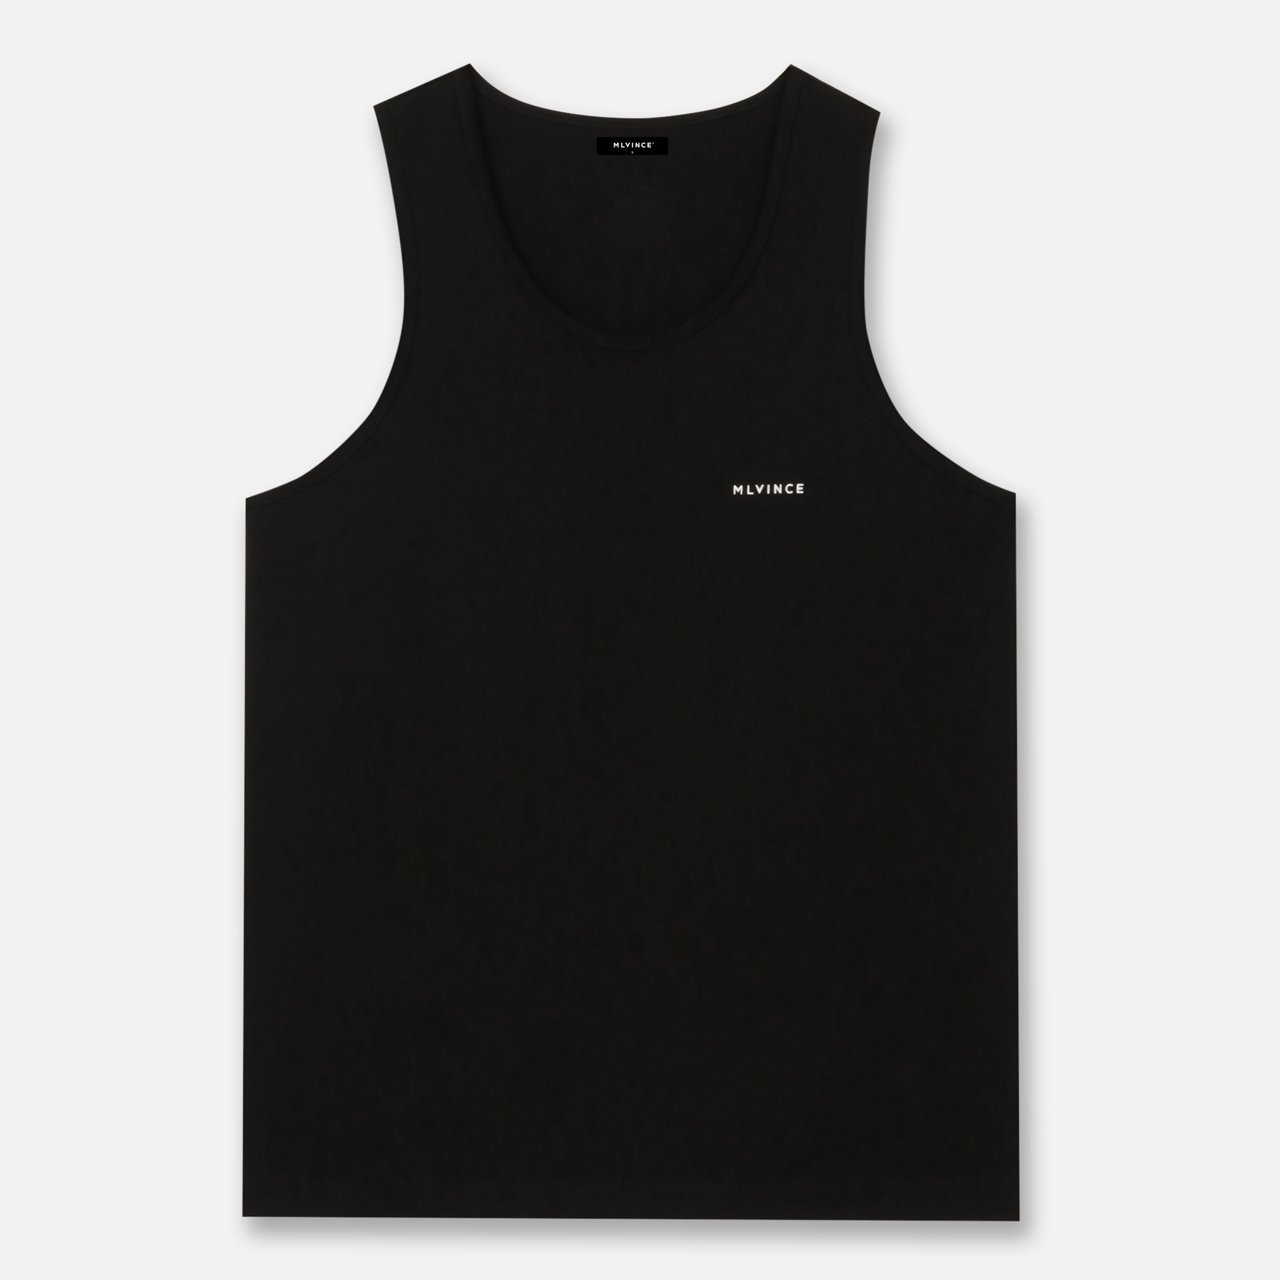 <img class='new_mark_img1' src='https://img.shop-pro.jp/img/new/icons5.gif' style='border:none;display:inline;margin:0px;padding:0px;width:auto;' />MLVINCE () | CLASSIC LOGO TANK BLACK